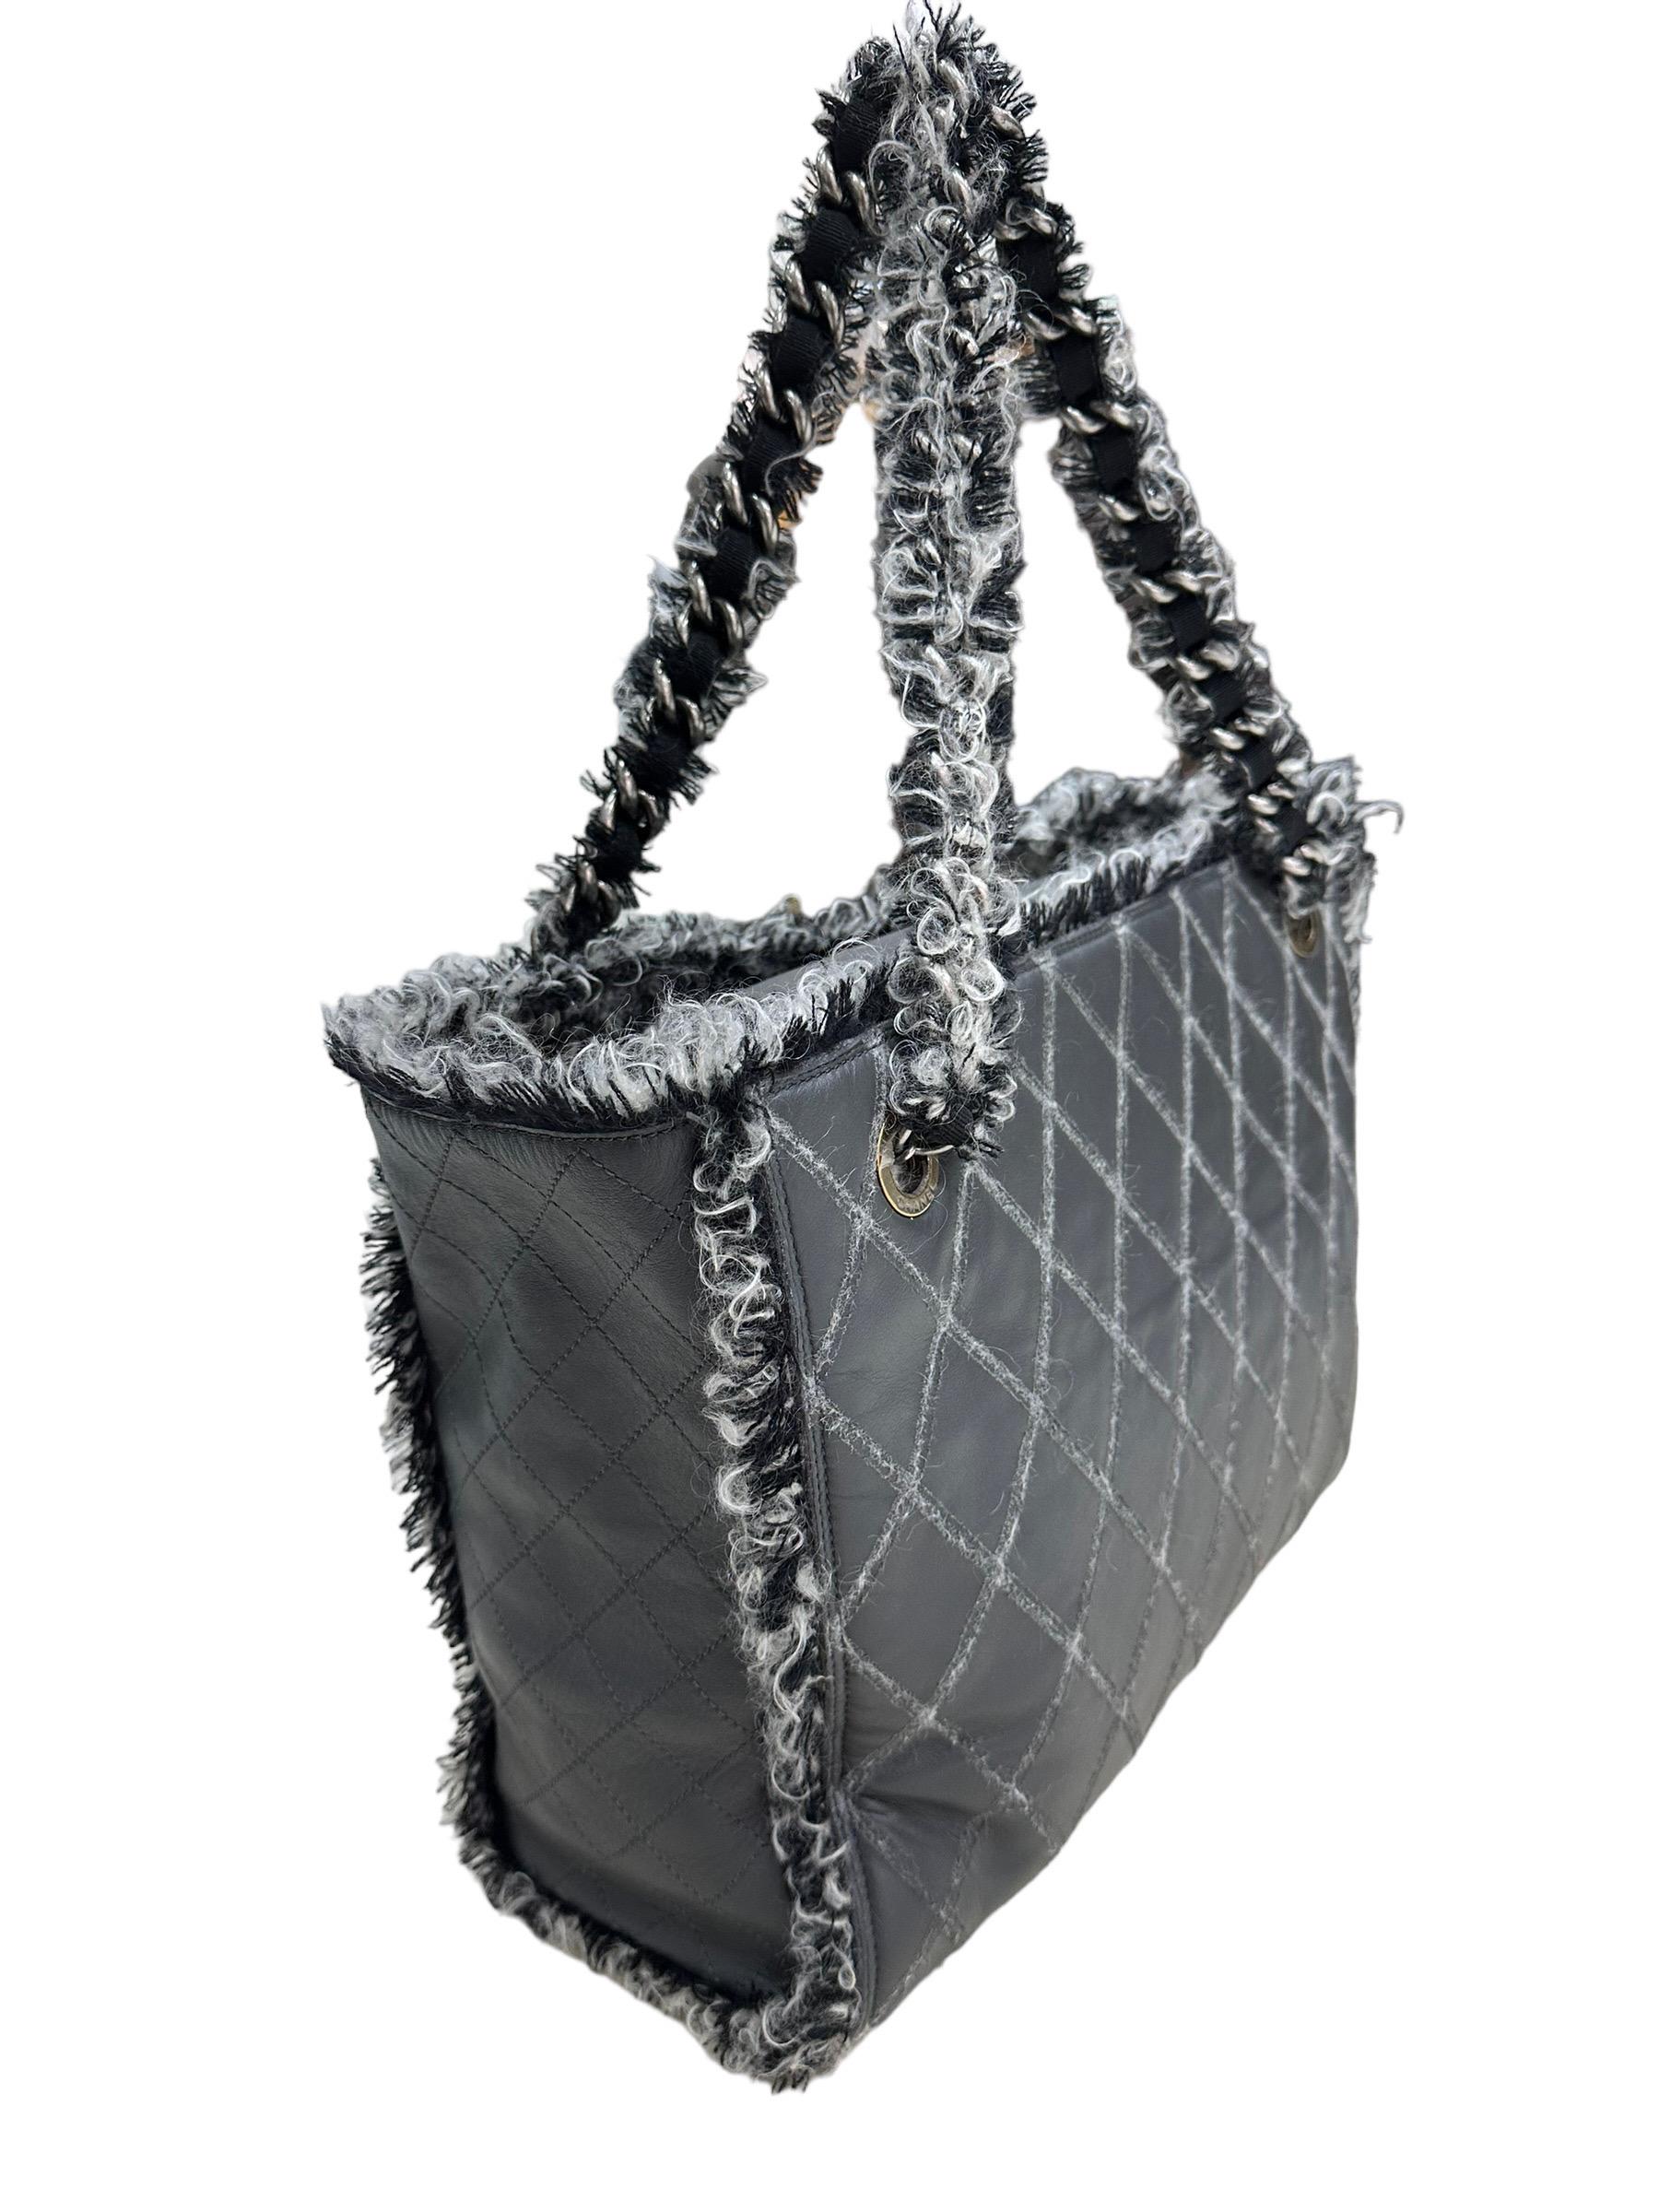 Women's 2011 Chanel Tweed Grey Tote Bag For Sale